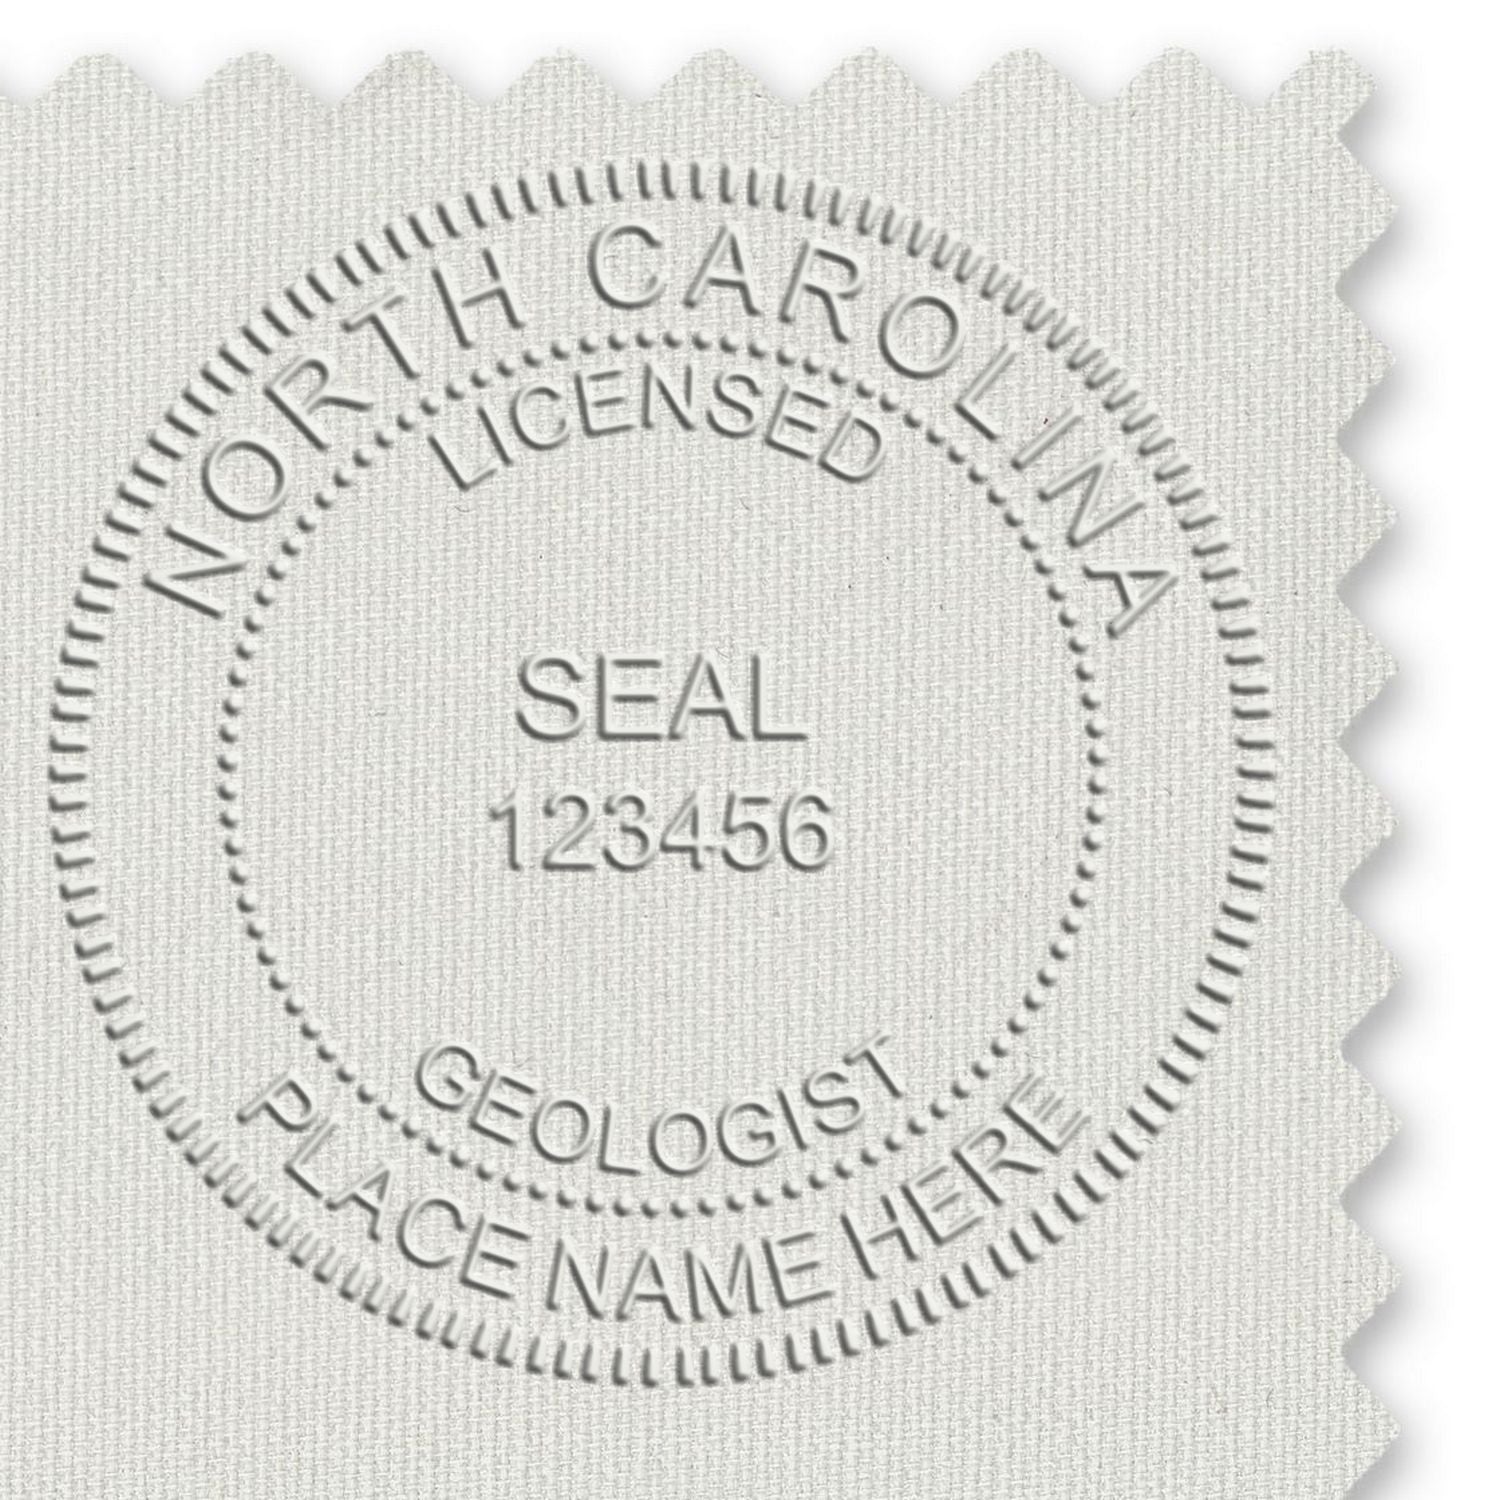 An in use photo of the Gift North Carolina Geologist Seal showing a sample imprint on a cardstock